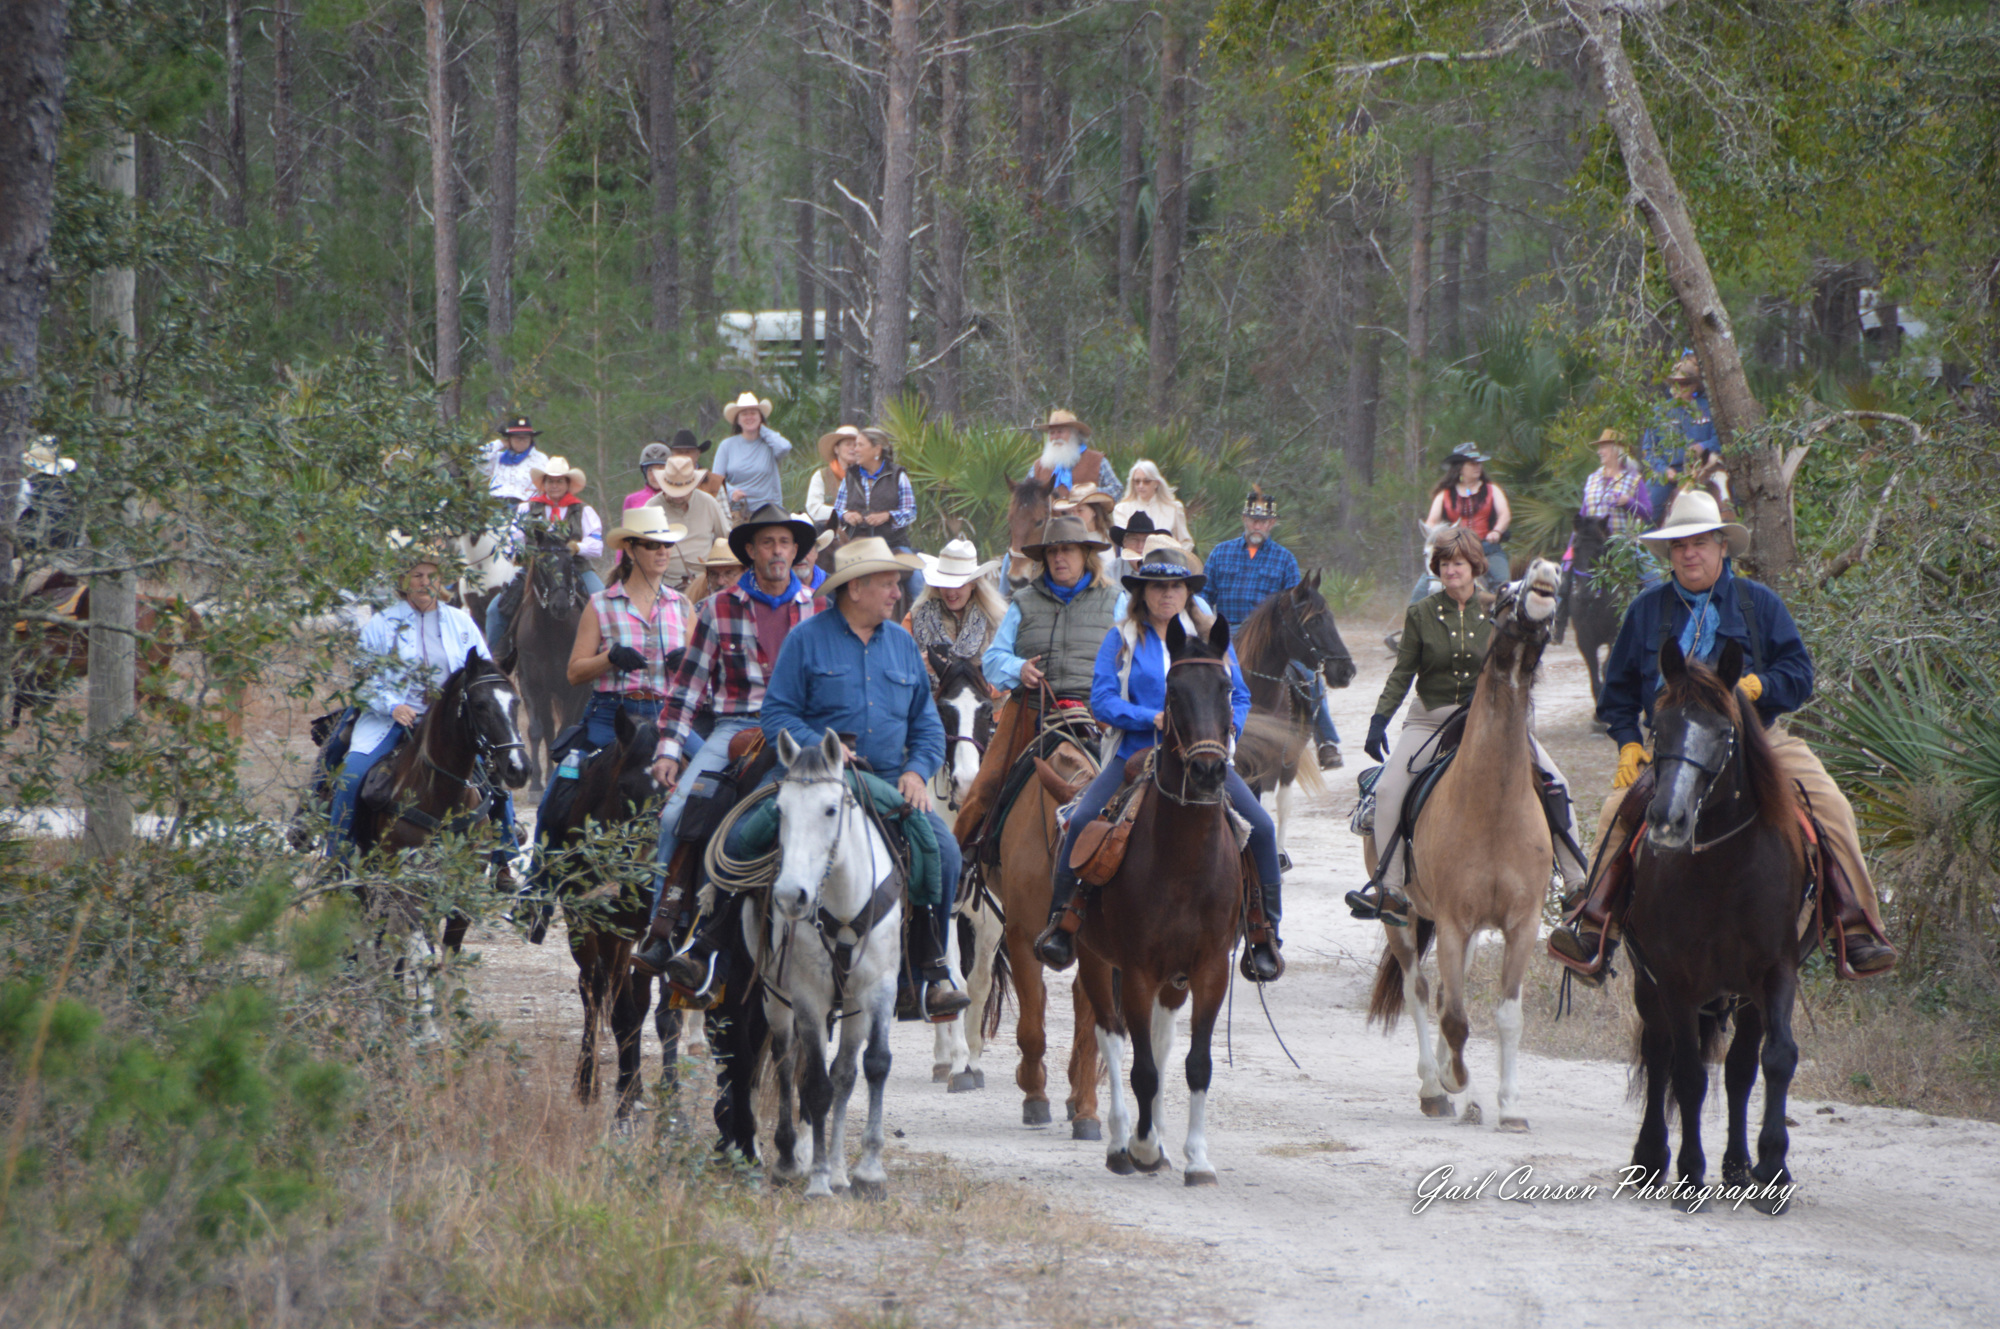 Jack Gillen, Van Baker and Manny Alvarez lead the Great Florida Cattle Drive Reunion Ride ’18, which took place at the Florida Agricultural Museum and Princess Place trails. Courtesy photo by Gail Carson Photography